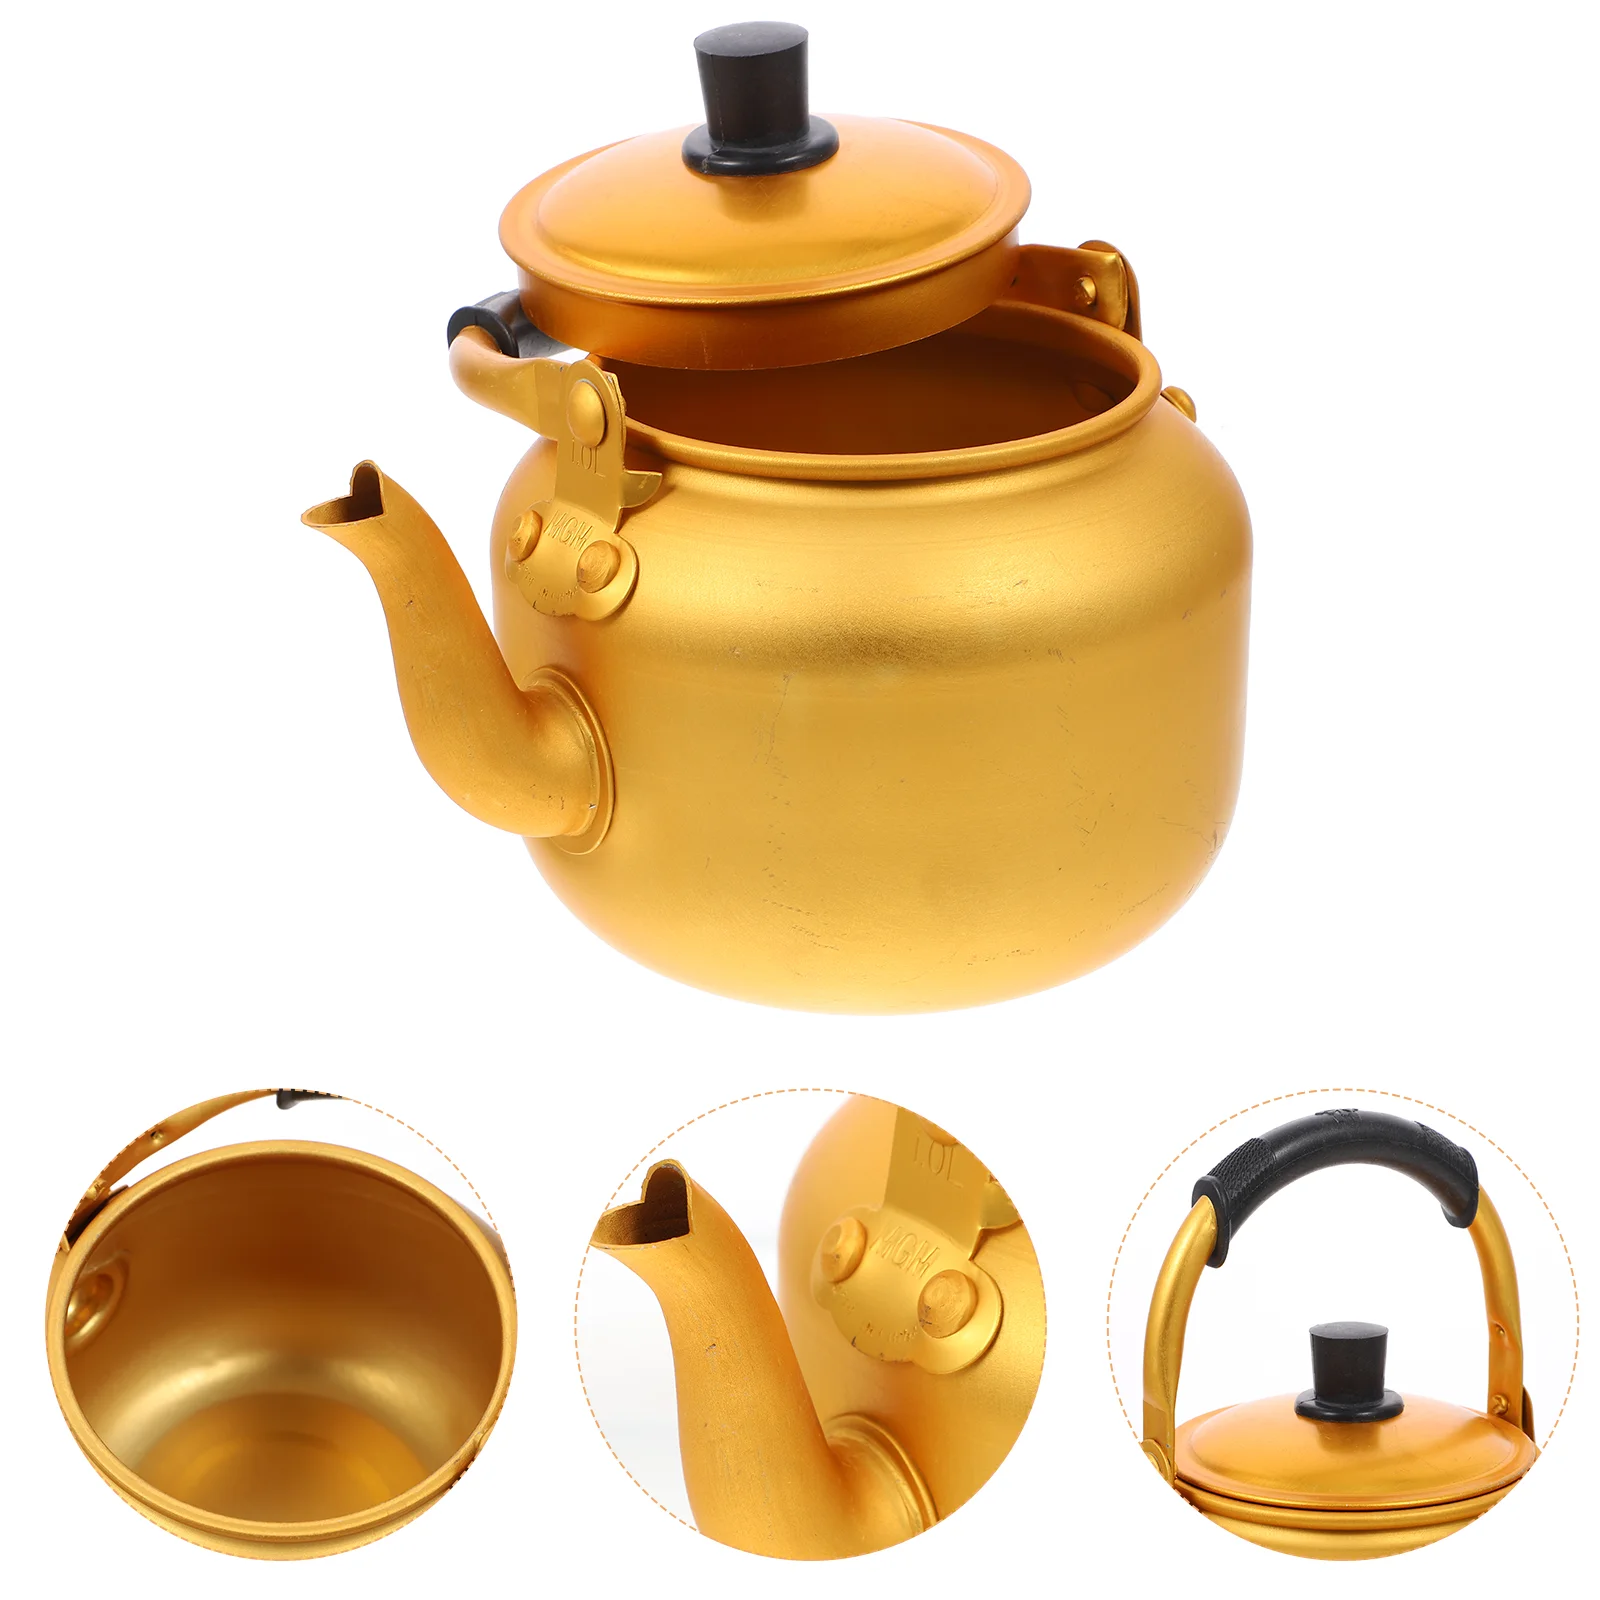 

Teapot Water Stovetop Tea Kettle: 1L Aluminium Boiling Whistling Tea Stovetop Kettle Heating Cup Coffee Pot for Household Golden